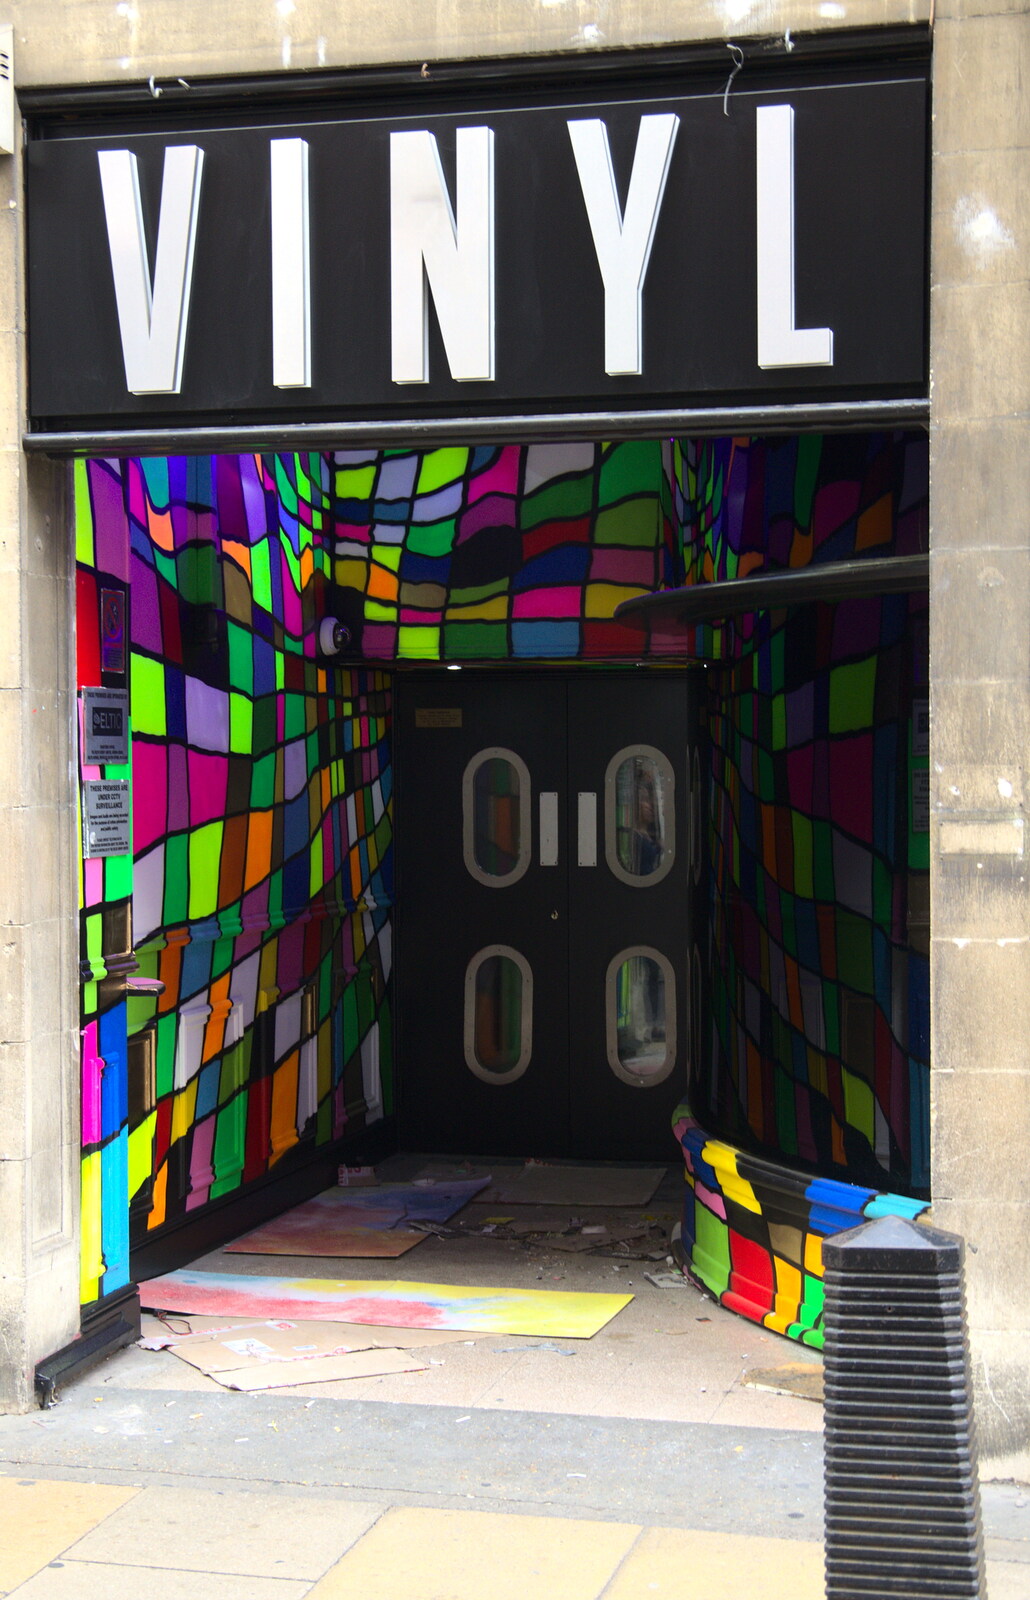 Funky entrance to a nightclub from The Retro Computer Festival, Centre For Computing History, Cambridge - 15th September 2018